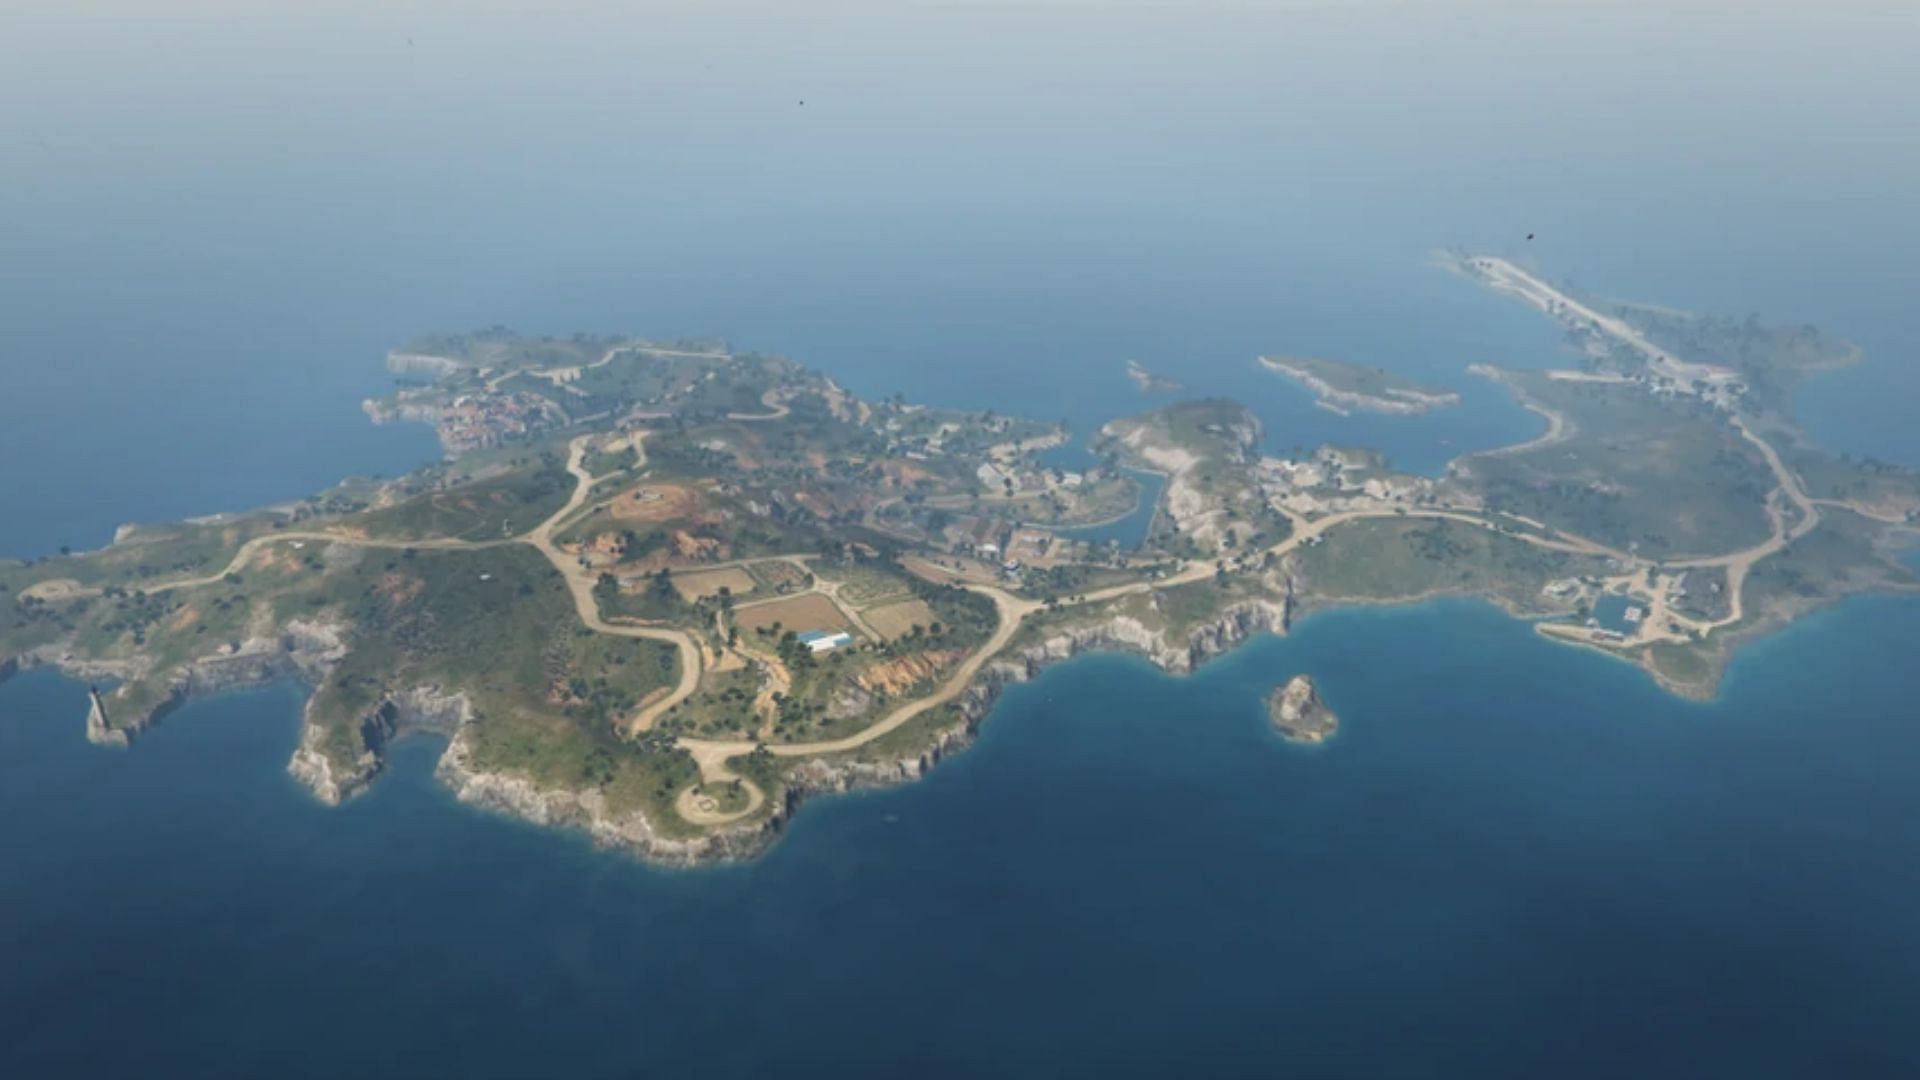 This cartel comes from South America, which has been seldom seen in the franchise, with this image showing off Cayo Perico (Image via Rockstar Games)